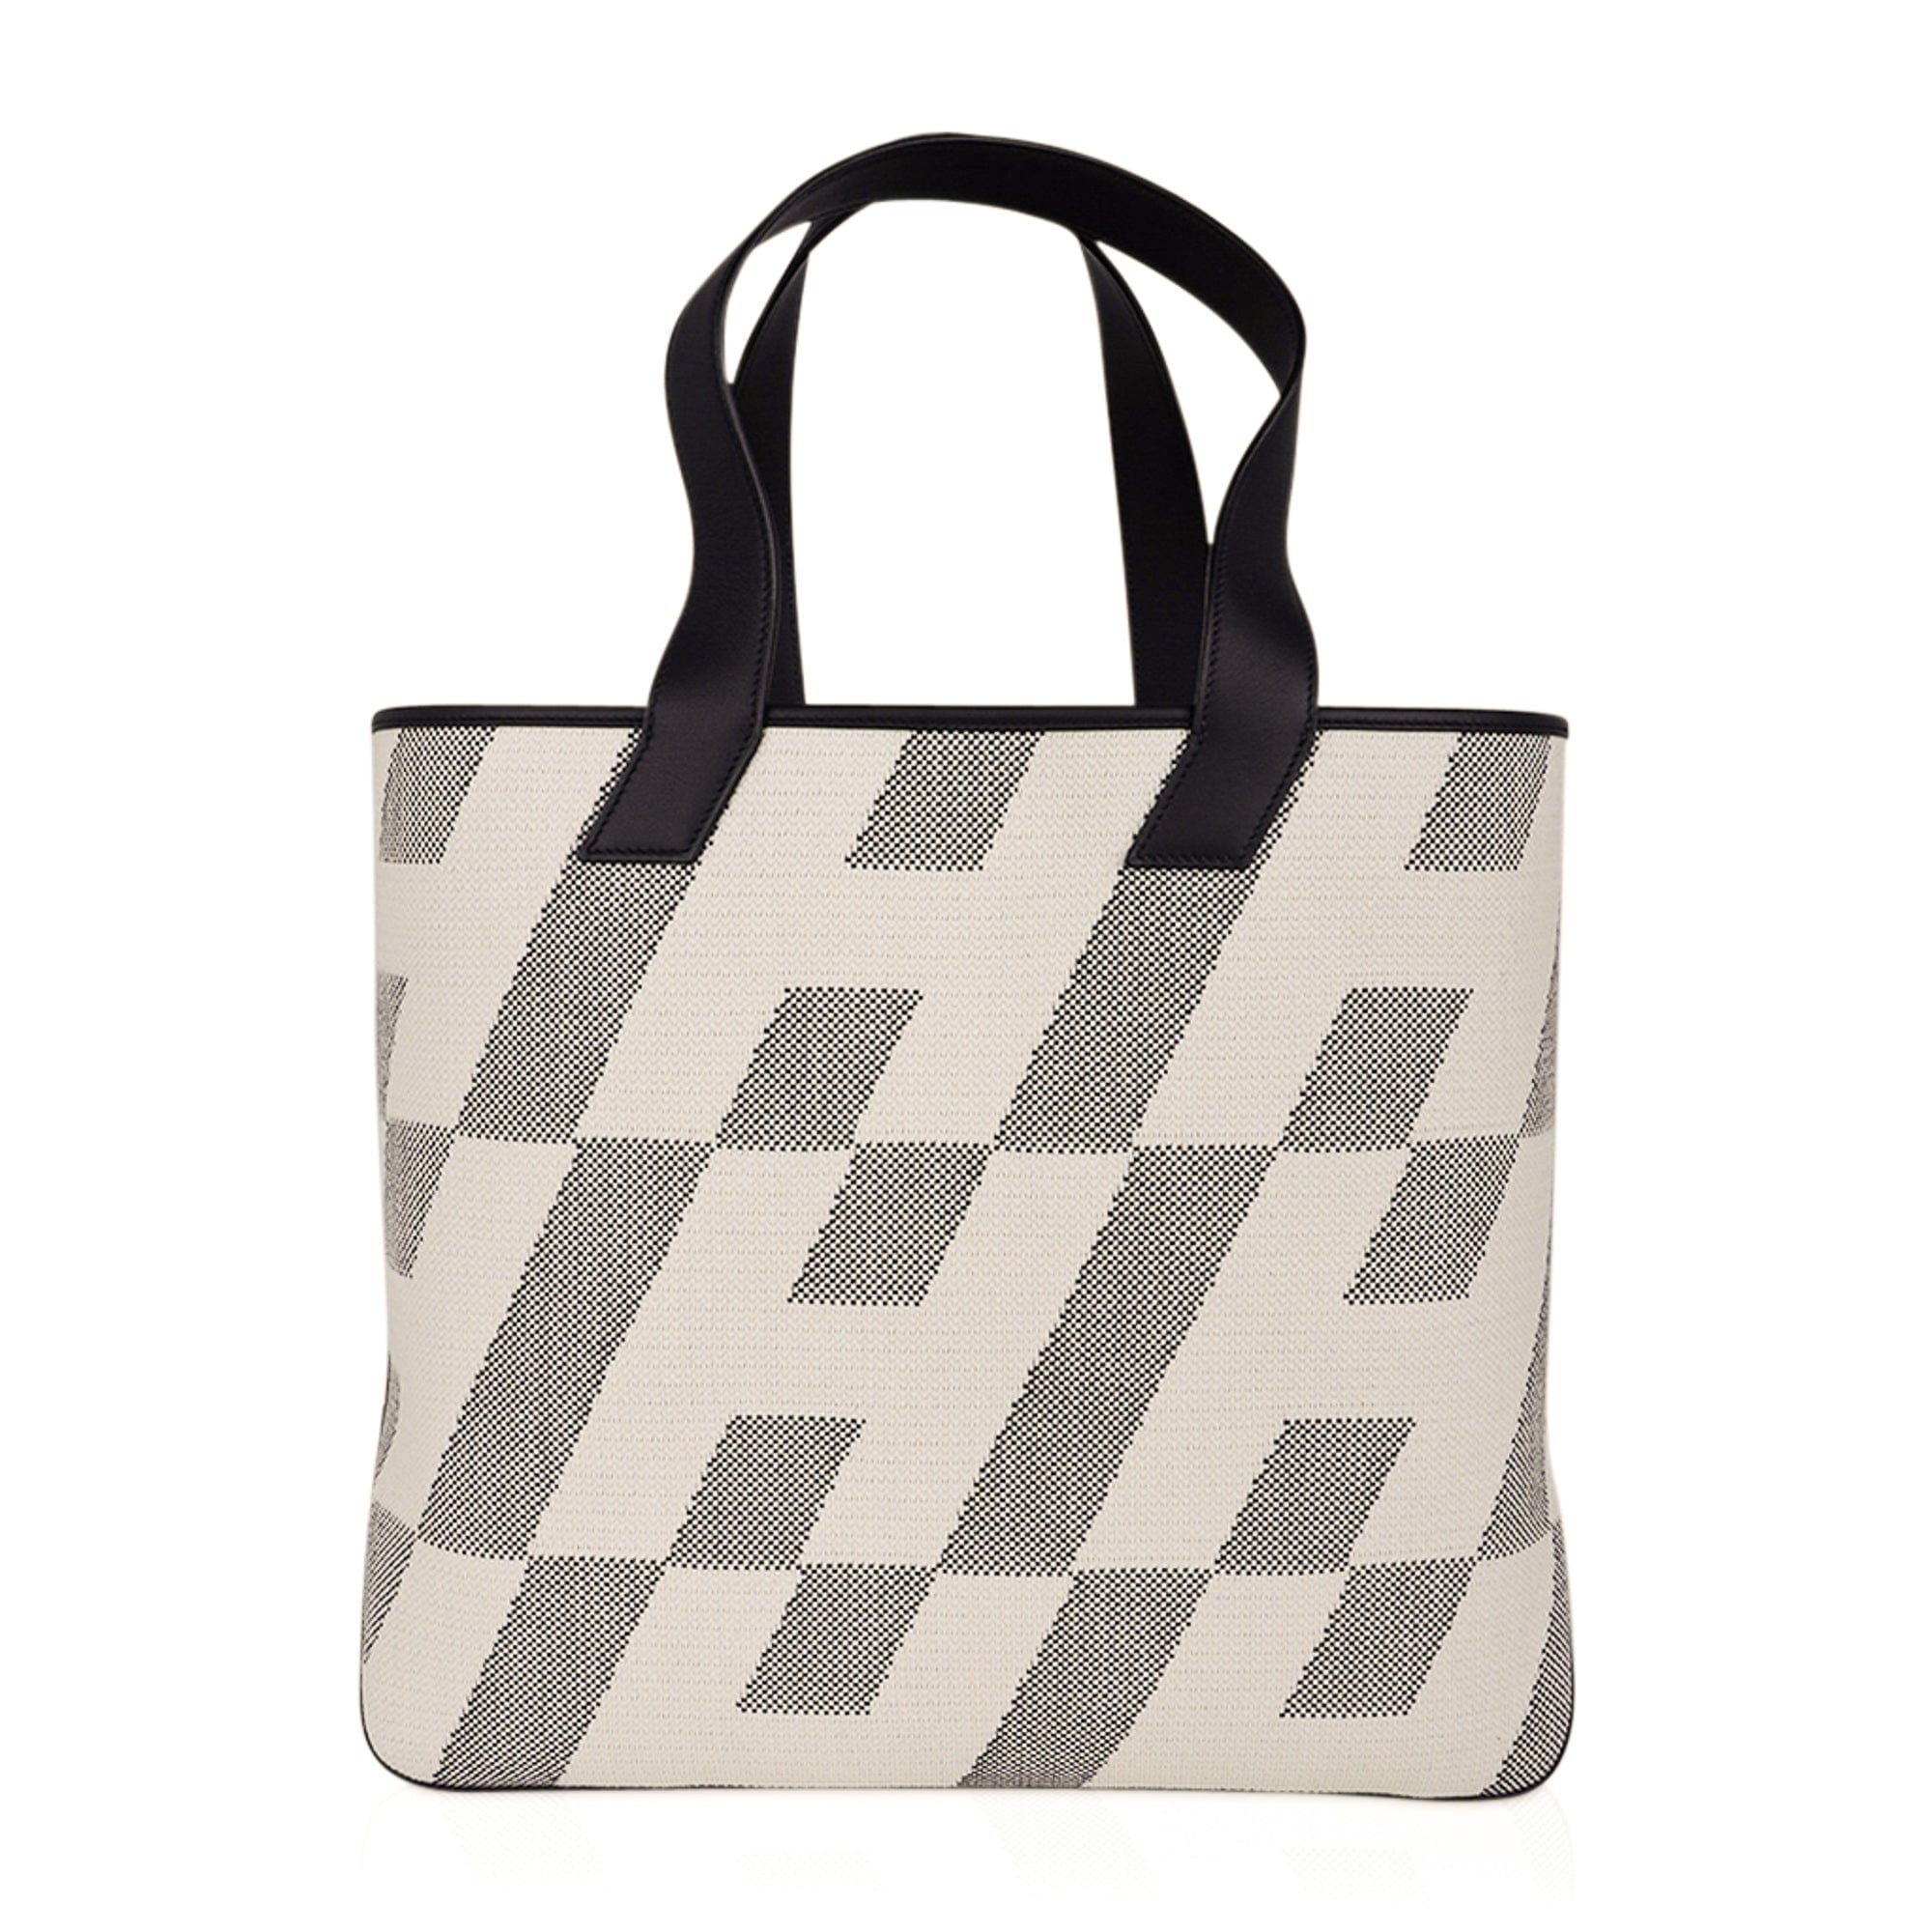 https://mightychic.com/wp-content/uploads/2023/12/hermes-cabas-h-en-biais-tote-for-sale-on-mightychic.jpg